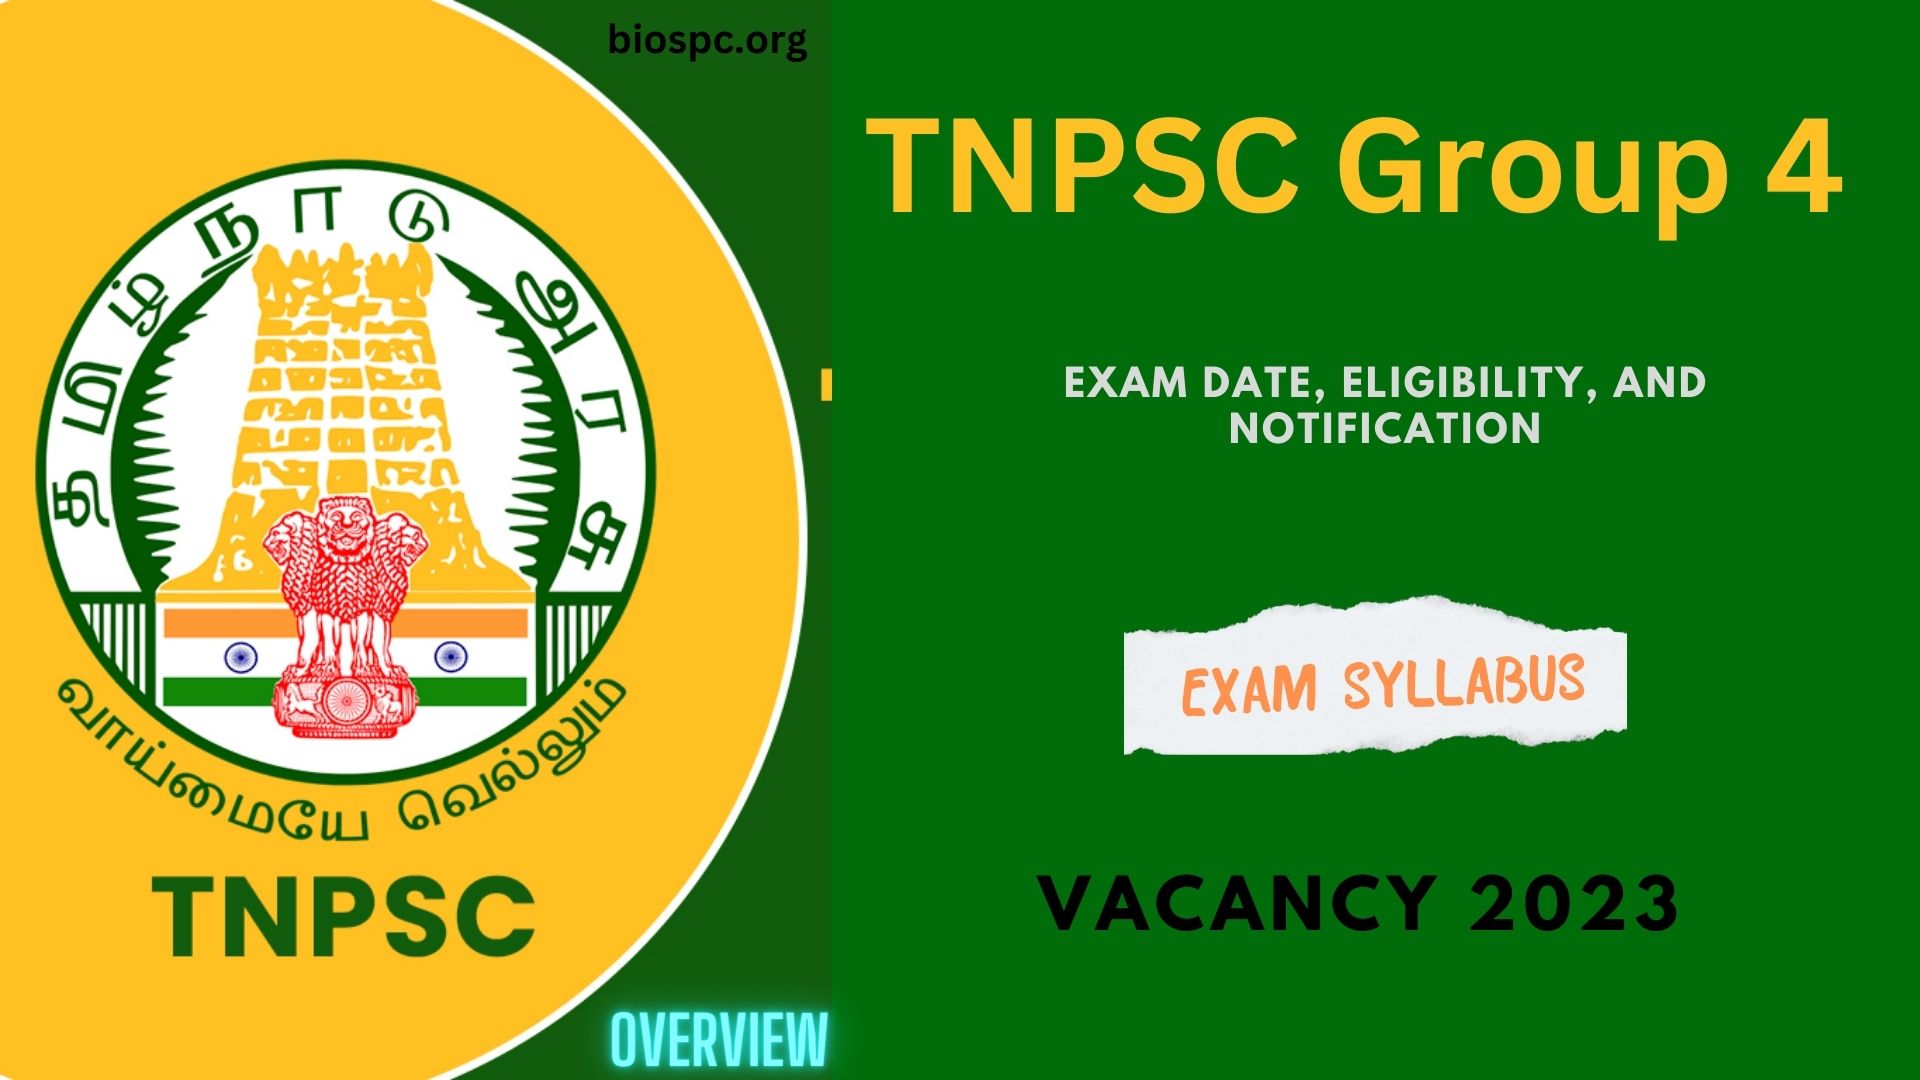 TNPSC Group 4 Exam Date, Eligibility, and Notification